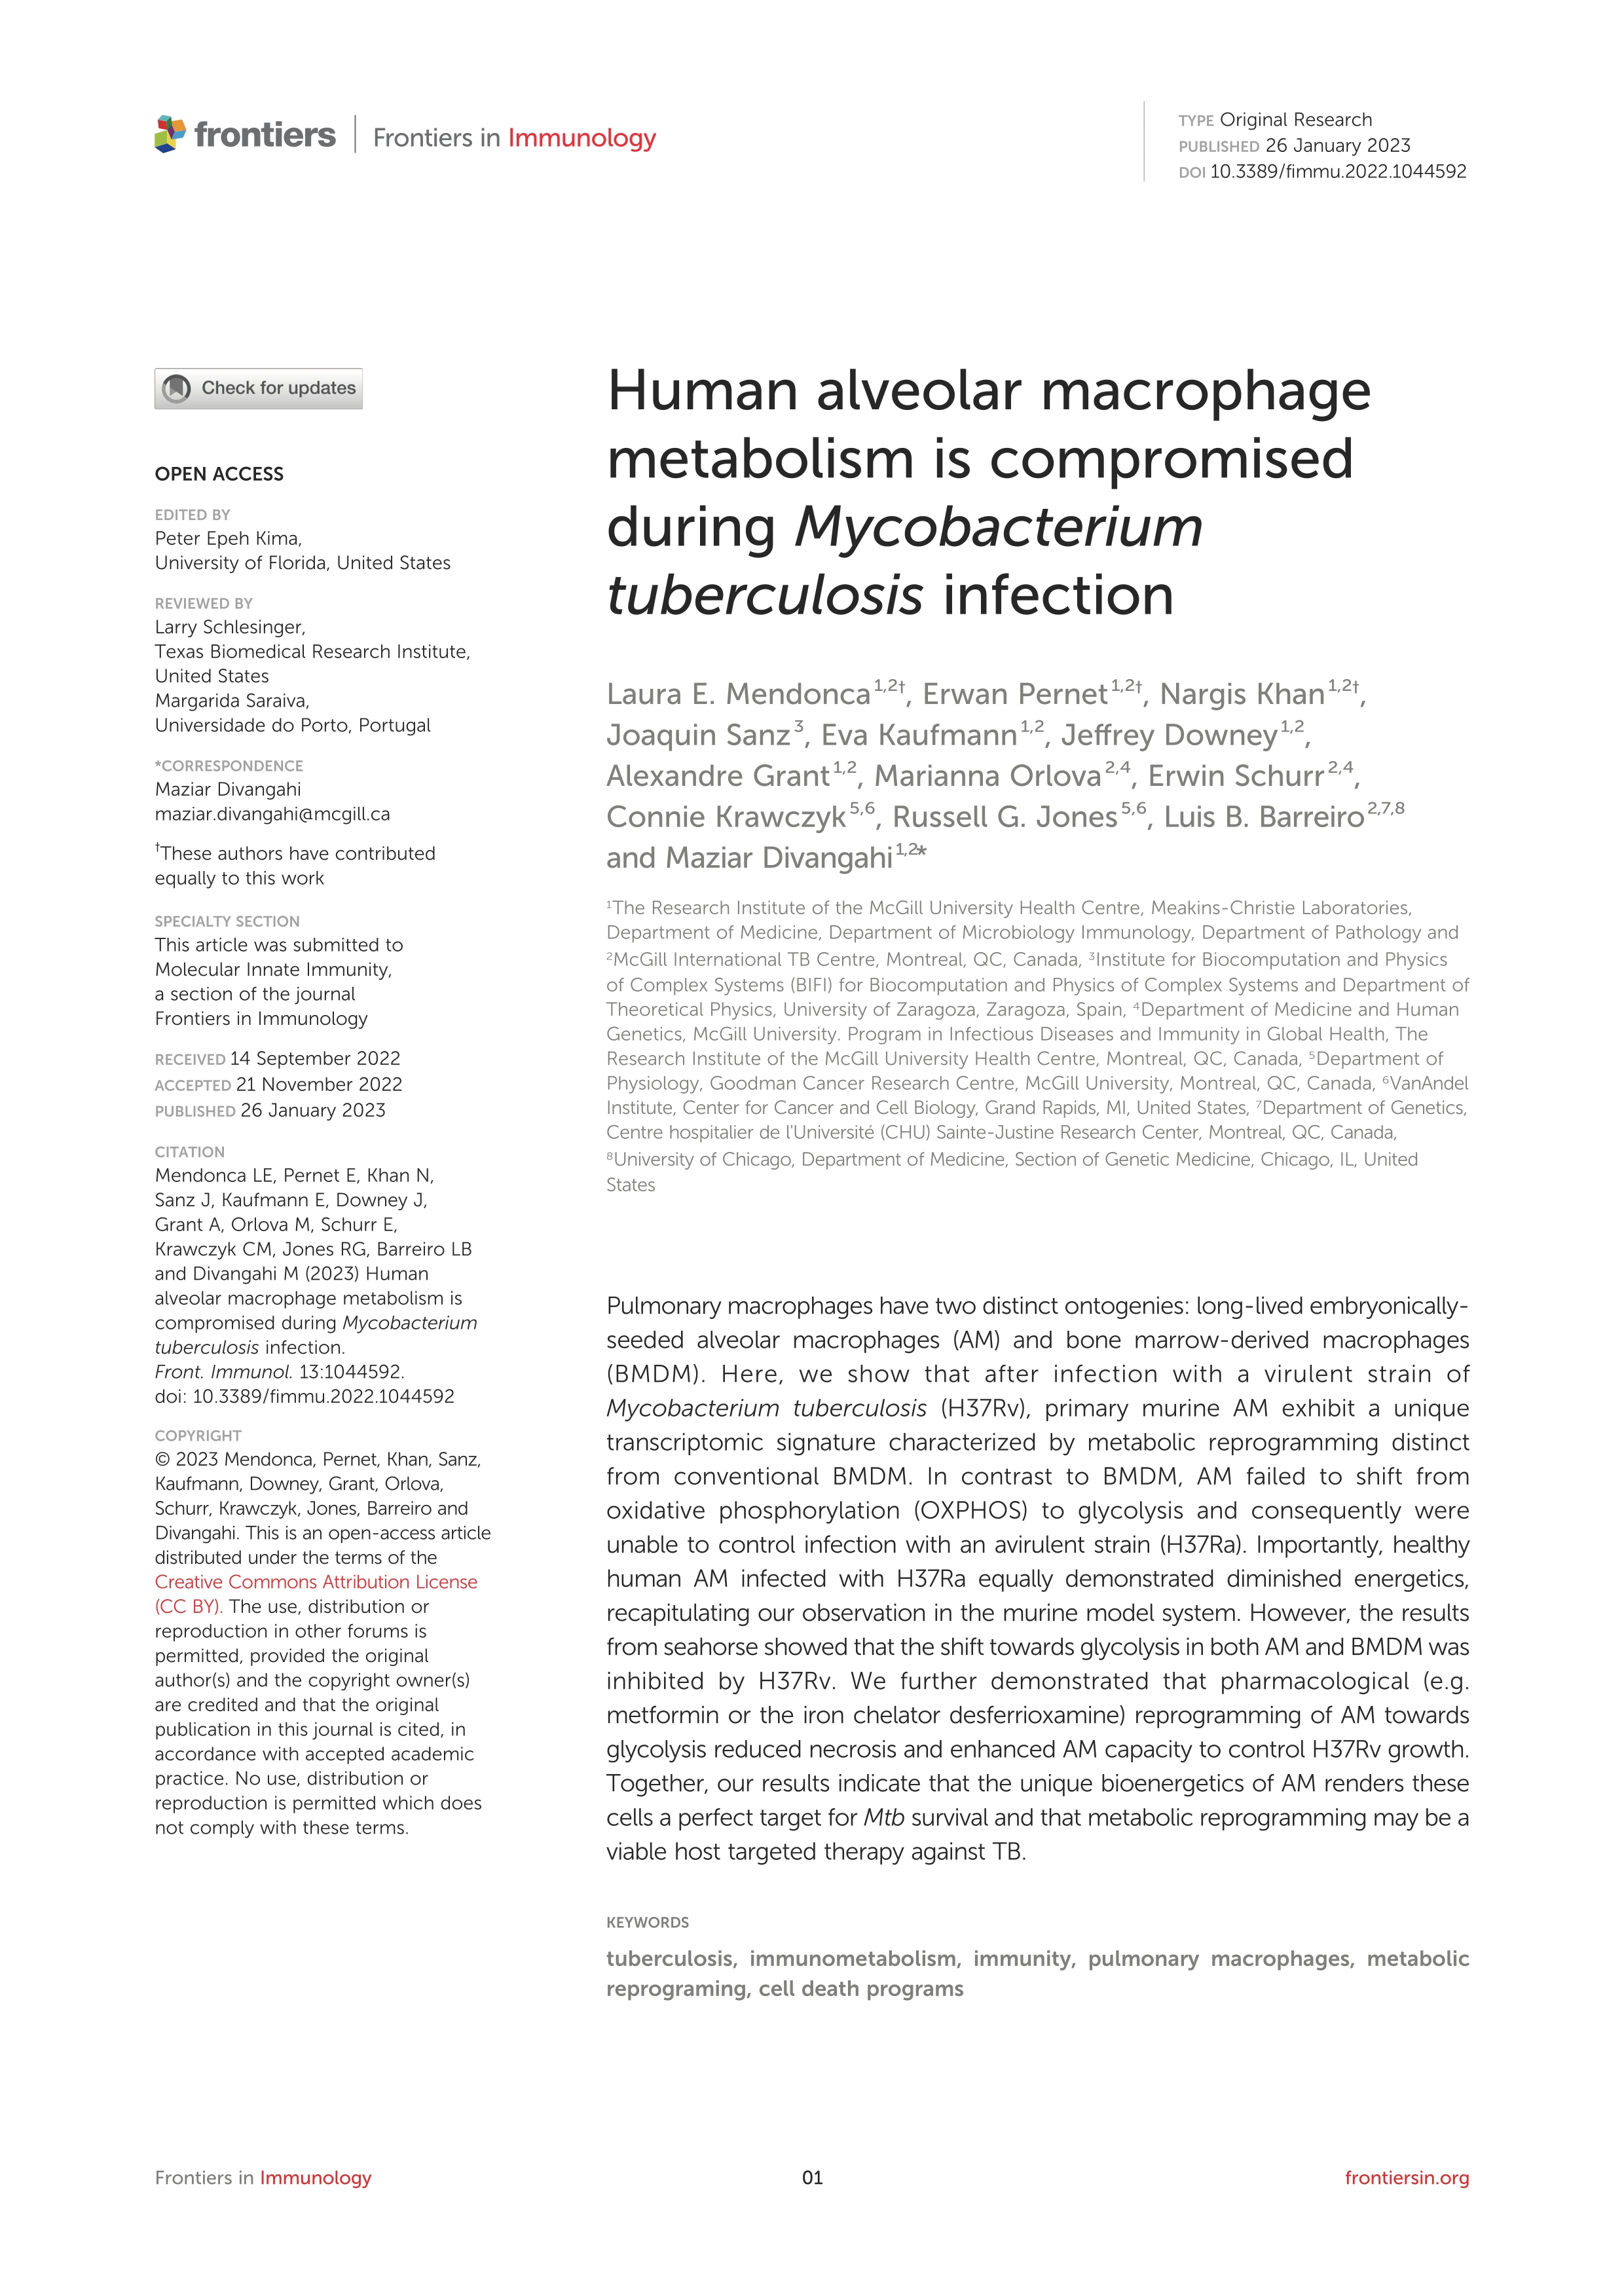 Human alveolar macrophage metabolism is compromised during Mycobacterium tuberculosis infection